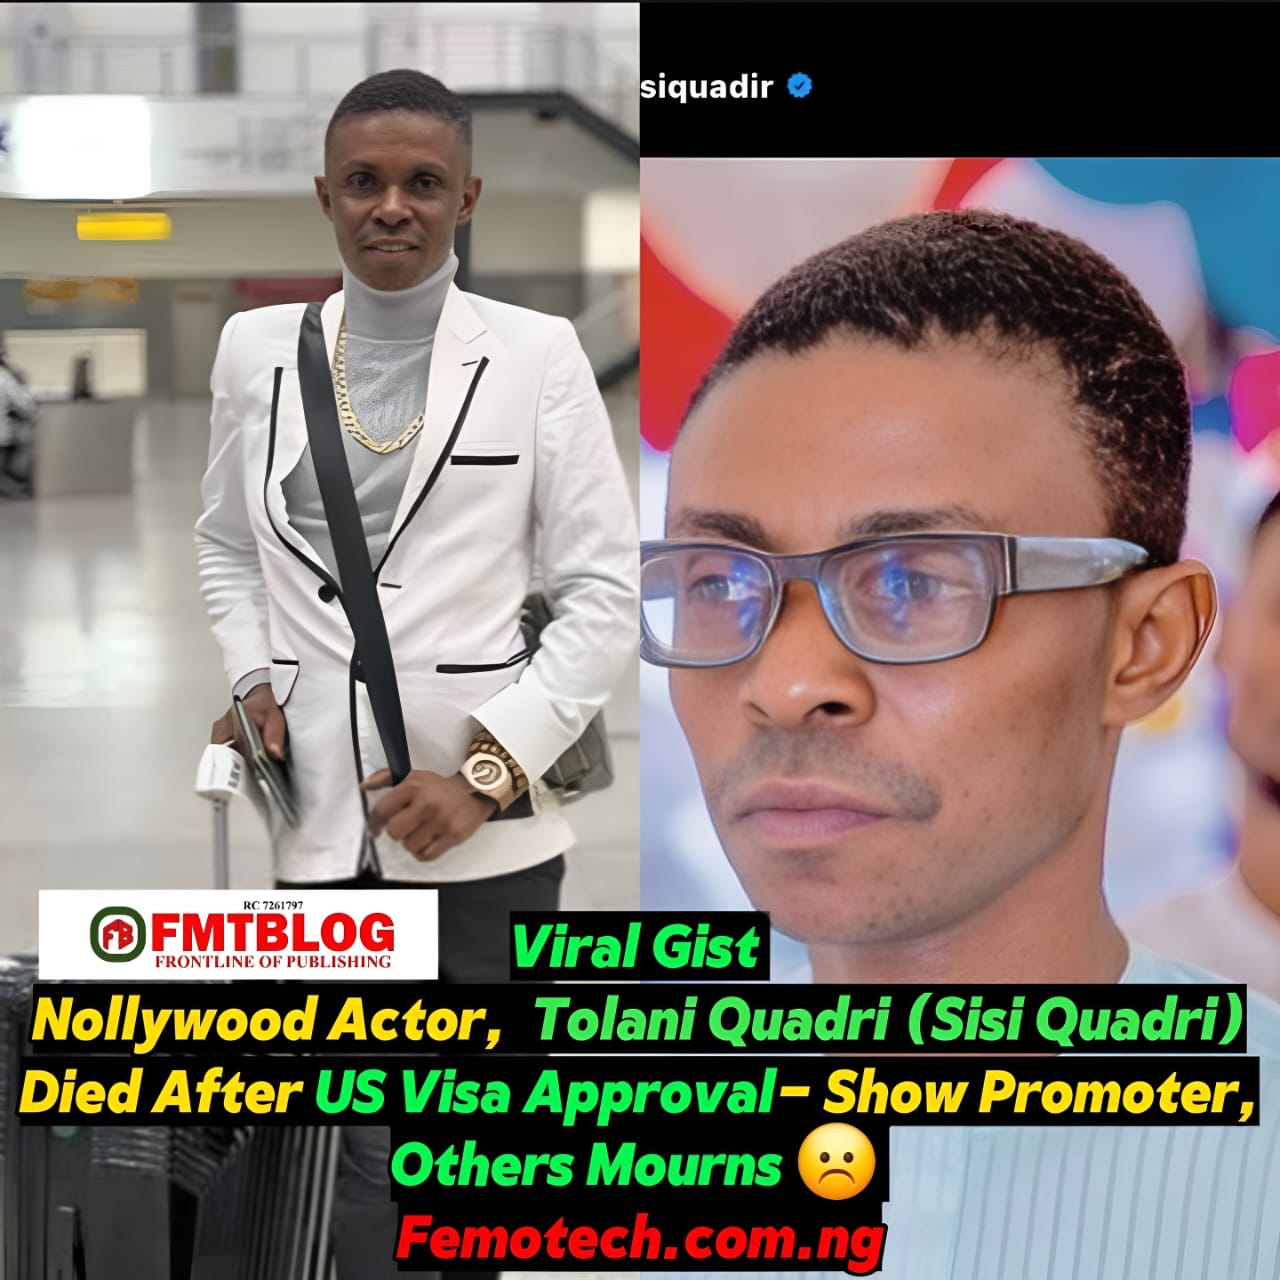 Nollywood Actor, Tolani Quadri (Sisi Quadri) Died After US Visa Approval -Show Promoter, Others Mourns